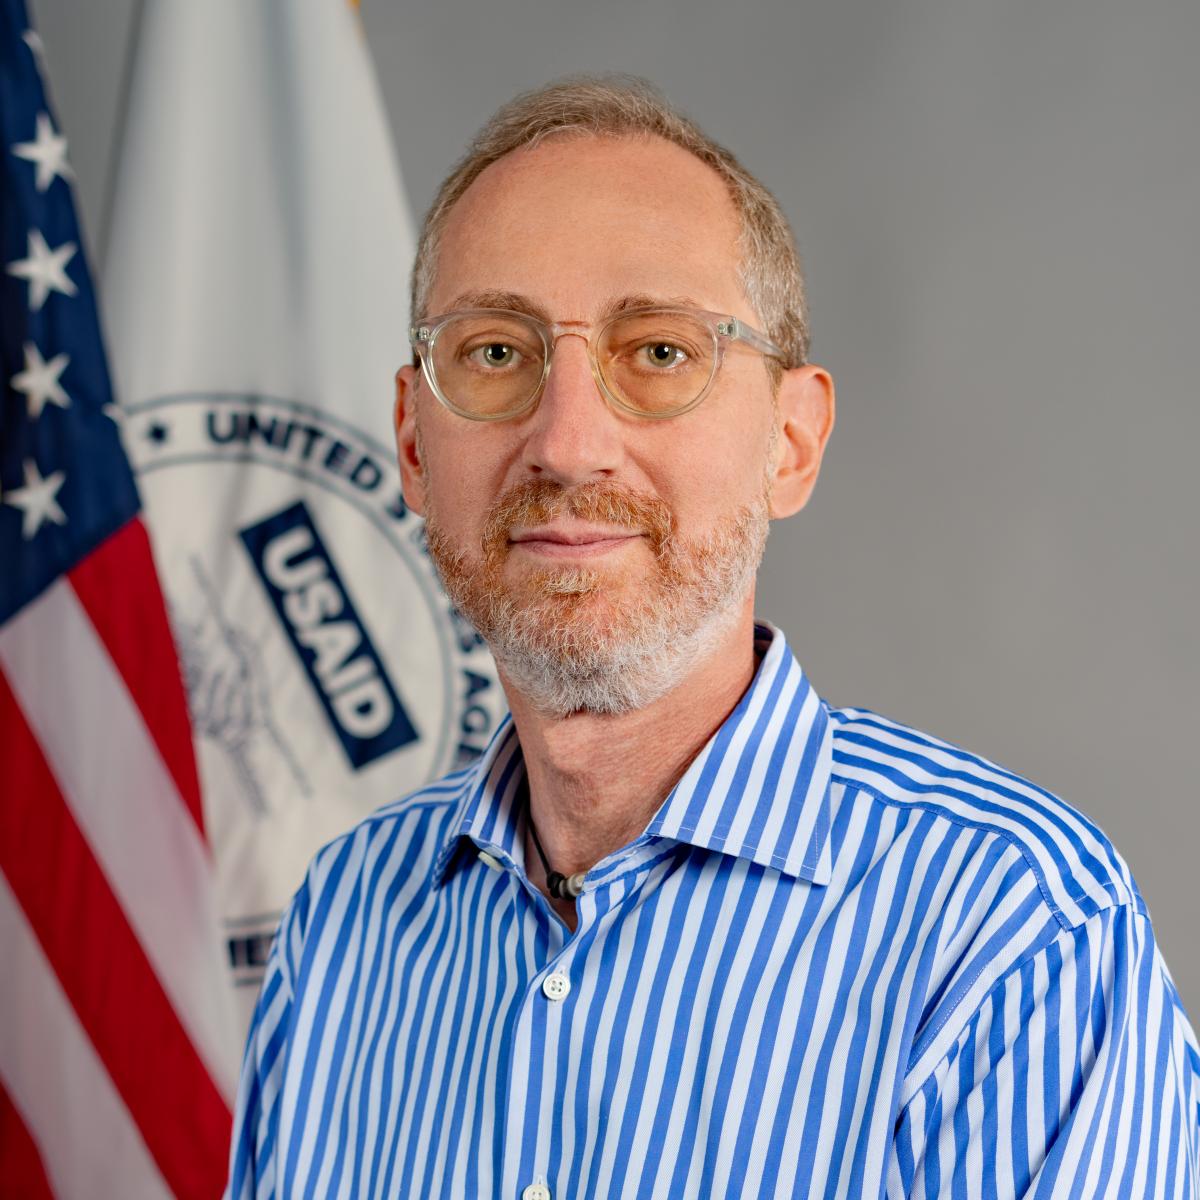 Welcome to Nepal Michael Schiffer, USAID's Assistant Administrator of the Bureau for Asia! During his visit, AA Schiffer will meet with government officials, civil society leaders, community groups, farmers, business owners, and to discuss Nepal’s efforts and achievements in…